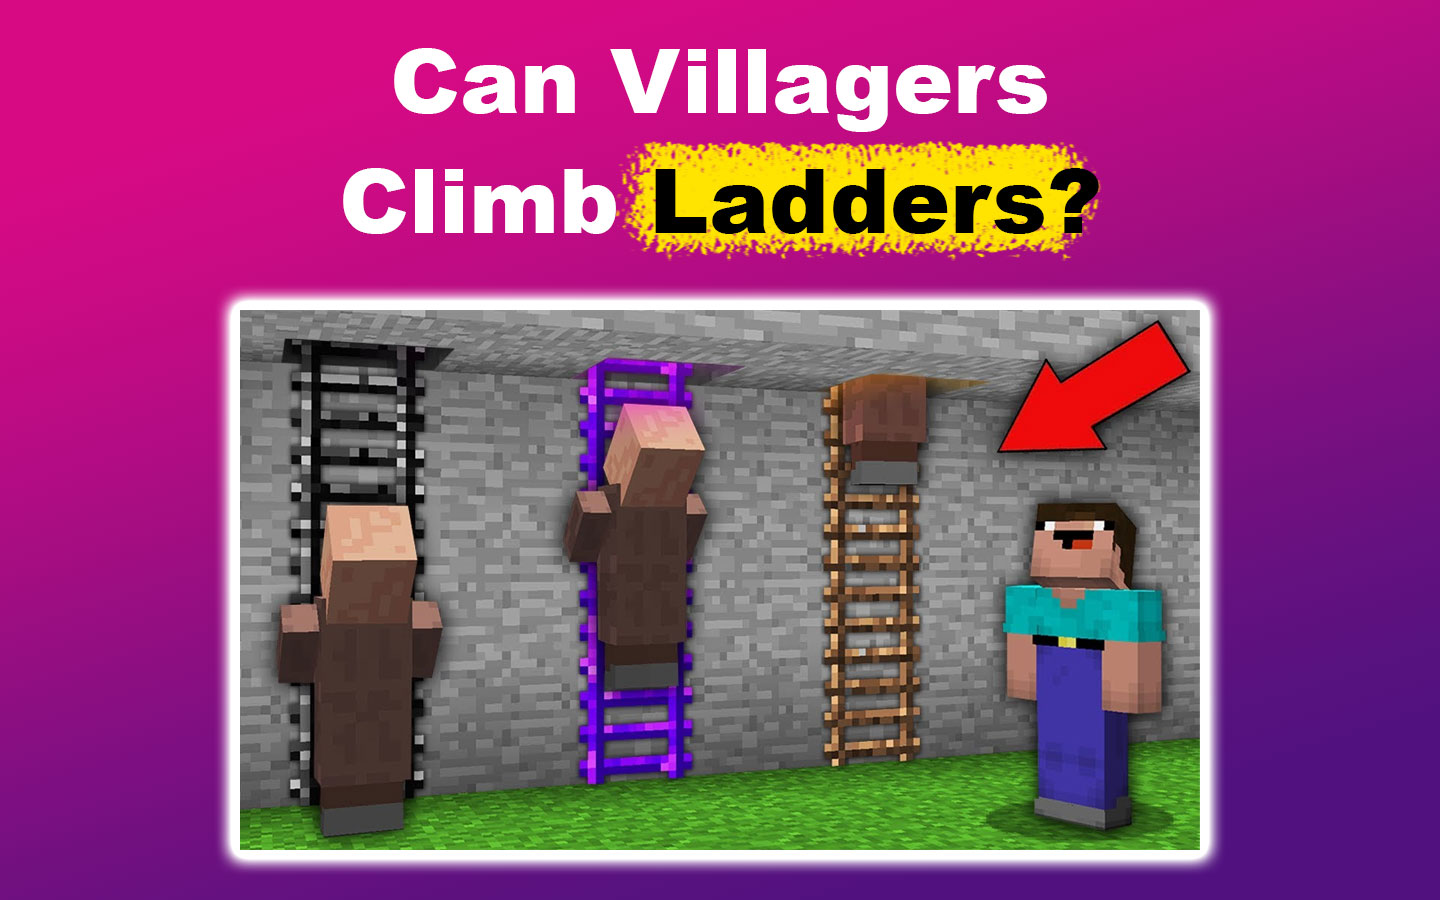 Can Villagers Climb Ladders